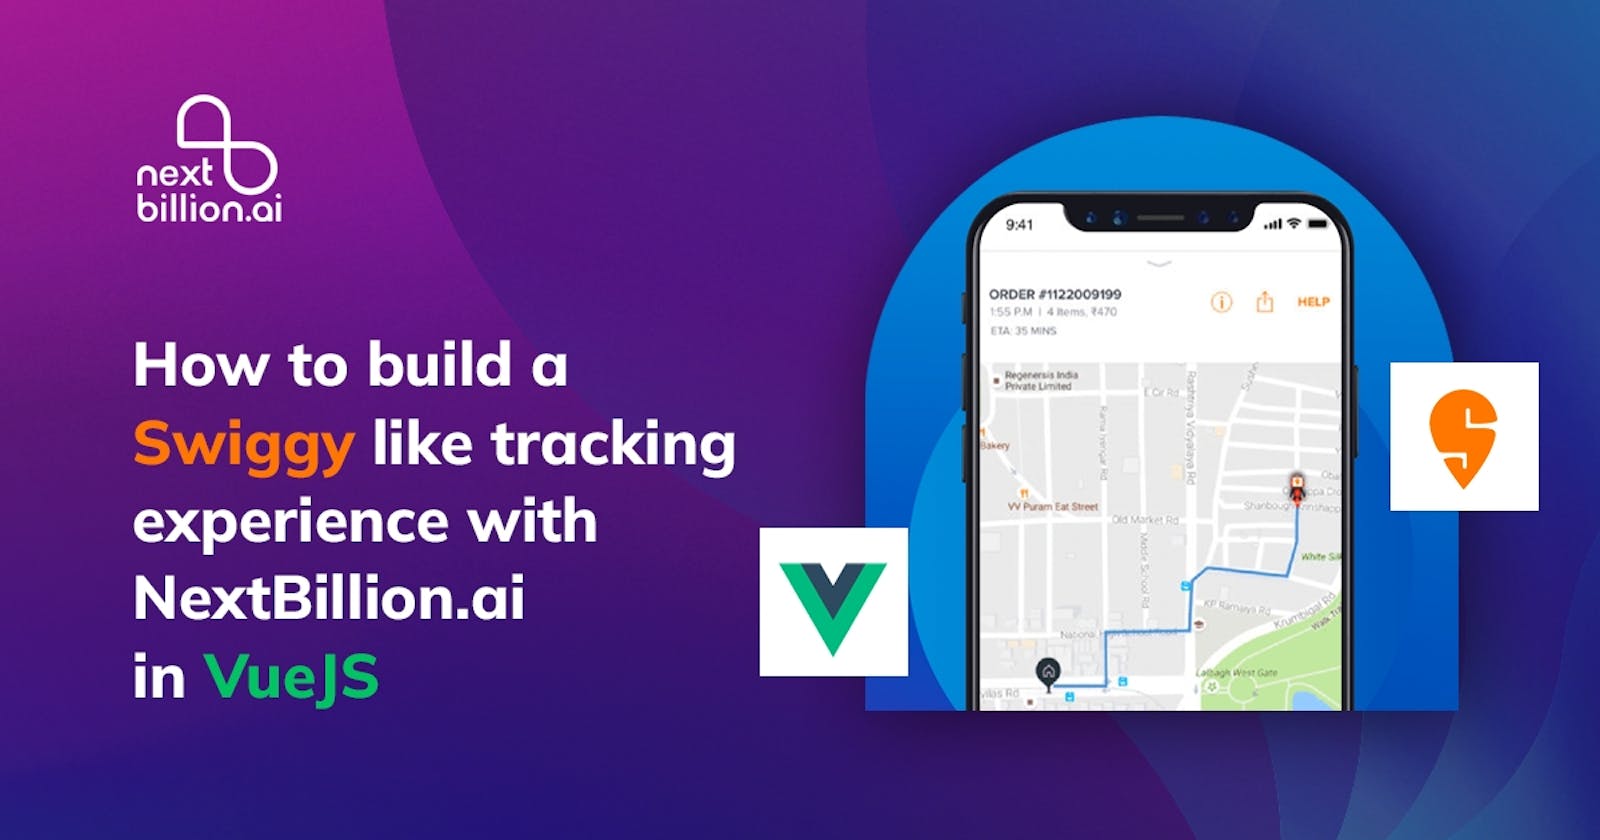 How to build a Swiggy like tracking experience with NextBillion.ai in VueJS